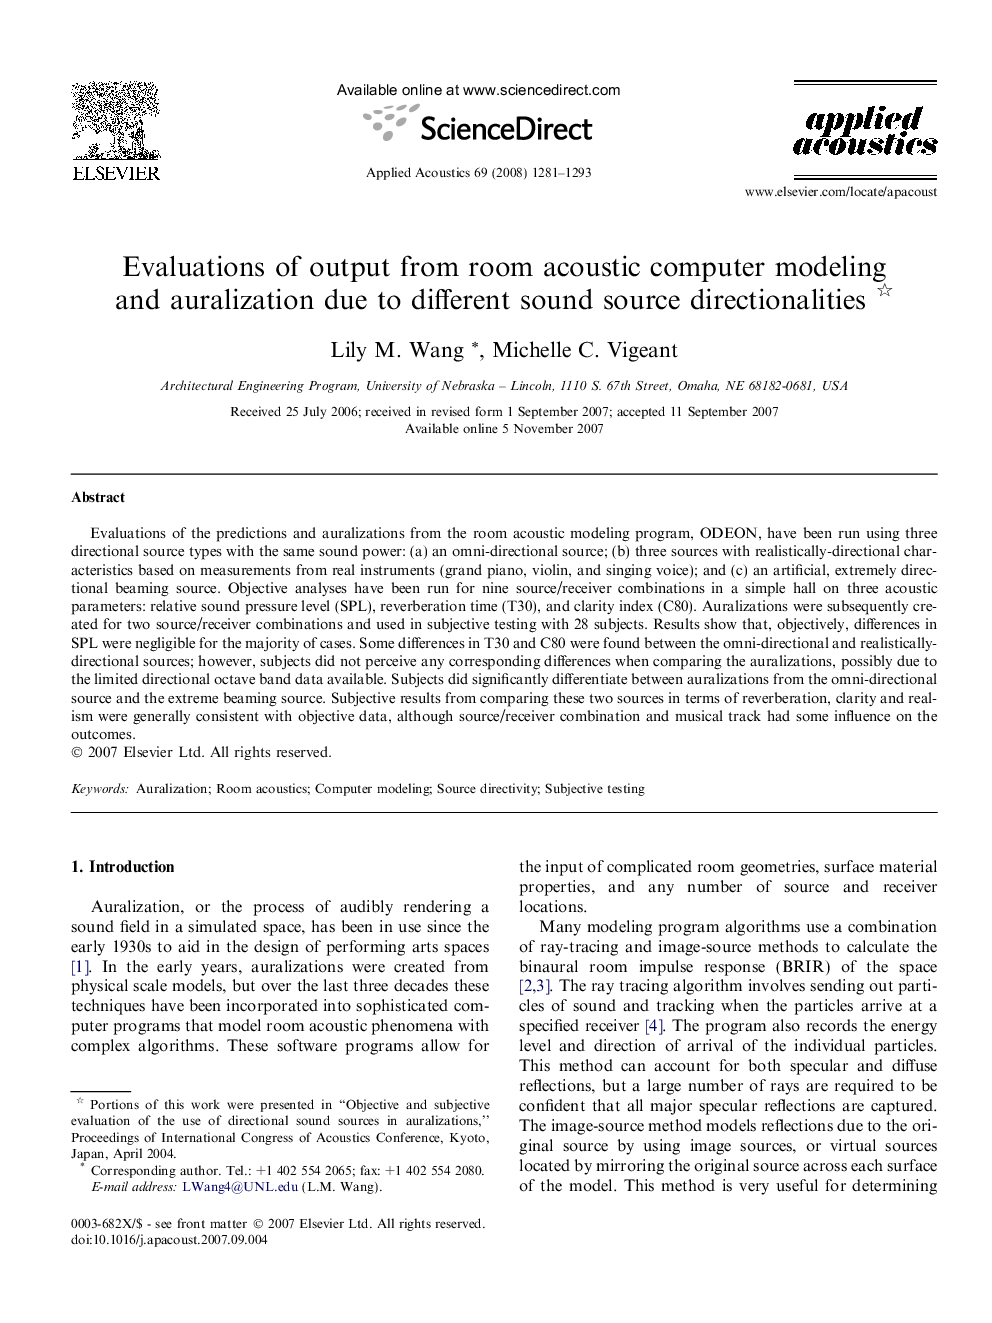 Evaluations of output from room acoustic computer modeling and auralization due to different sound source directionalities 